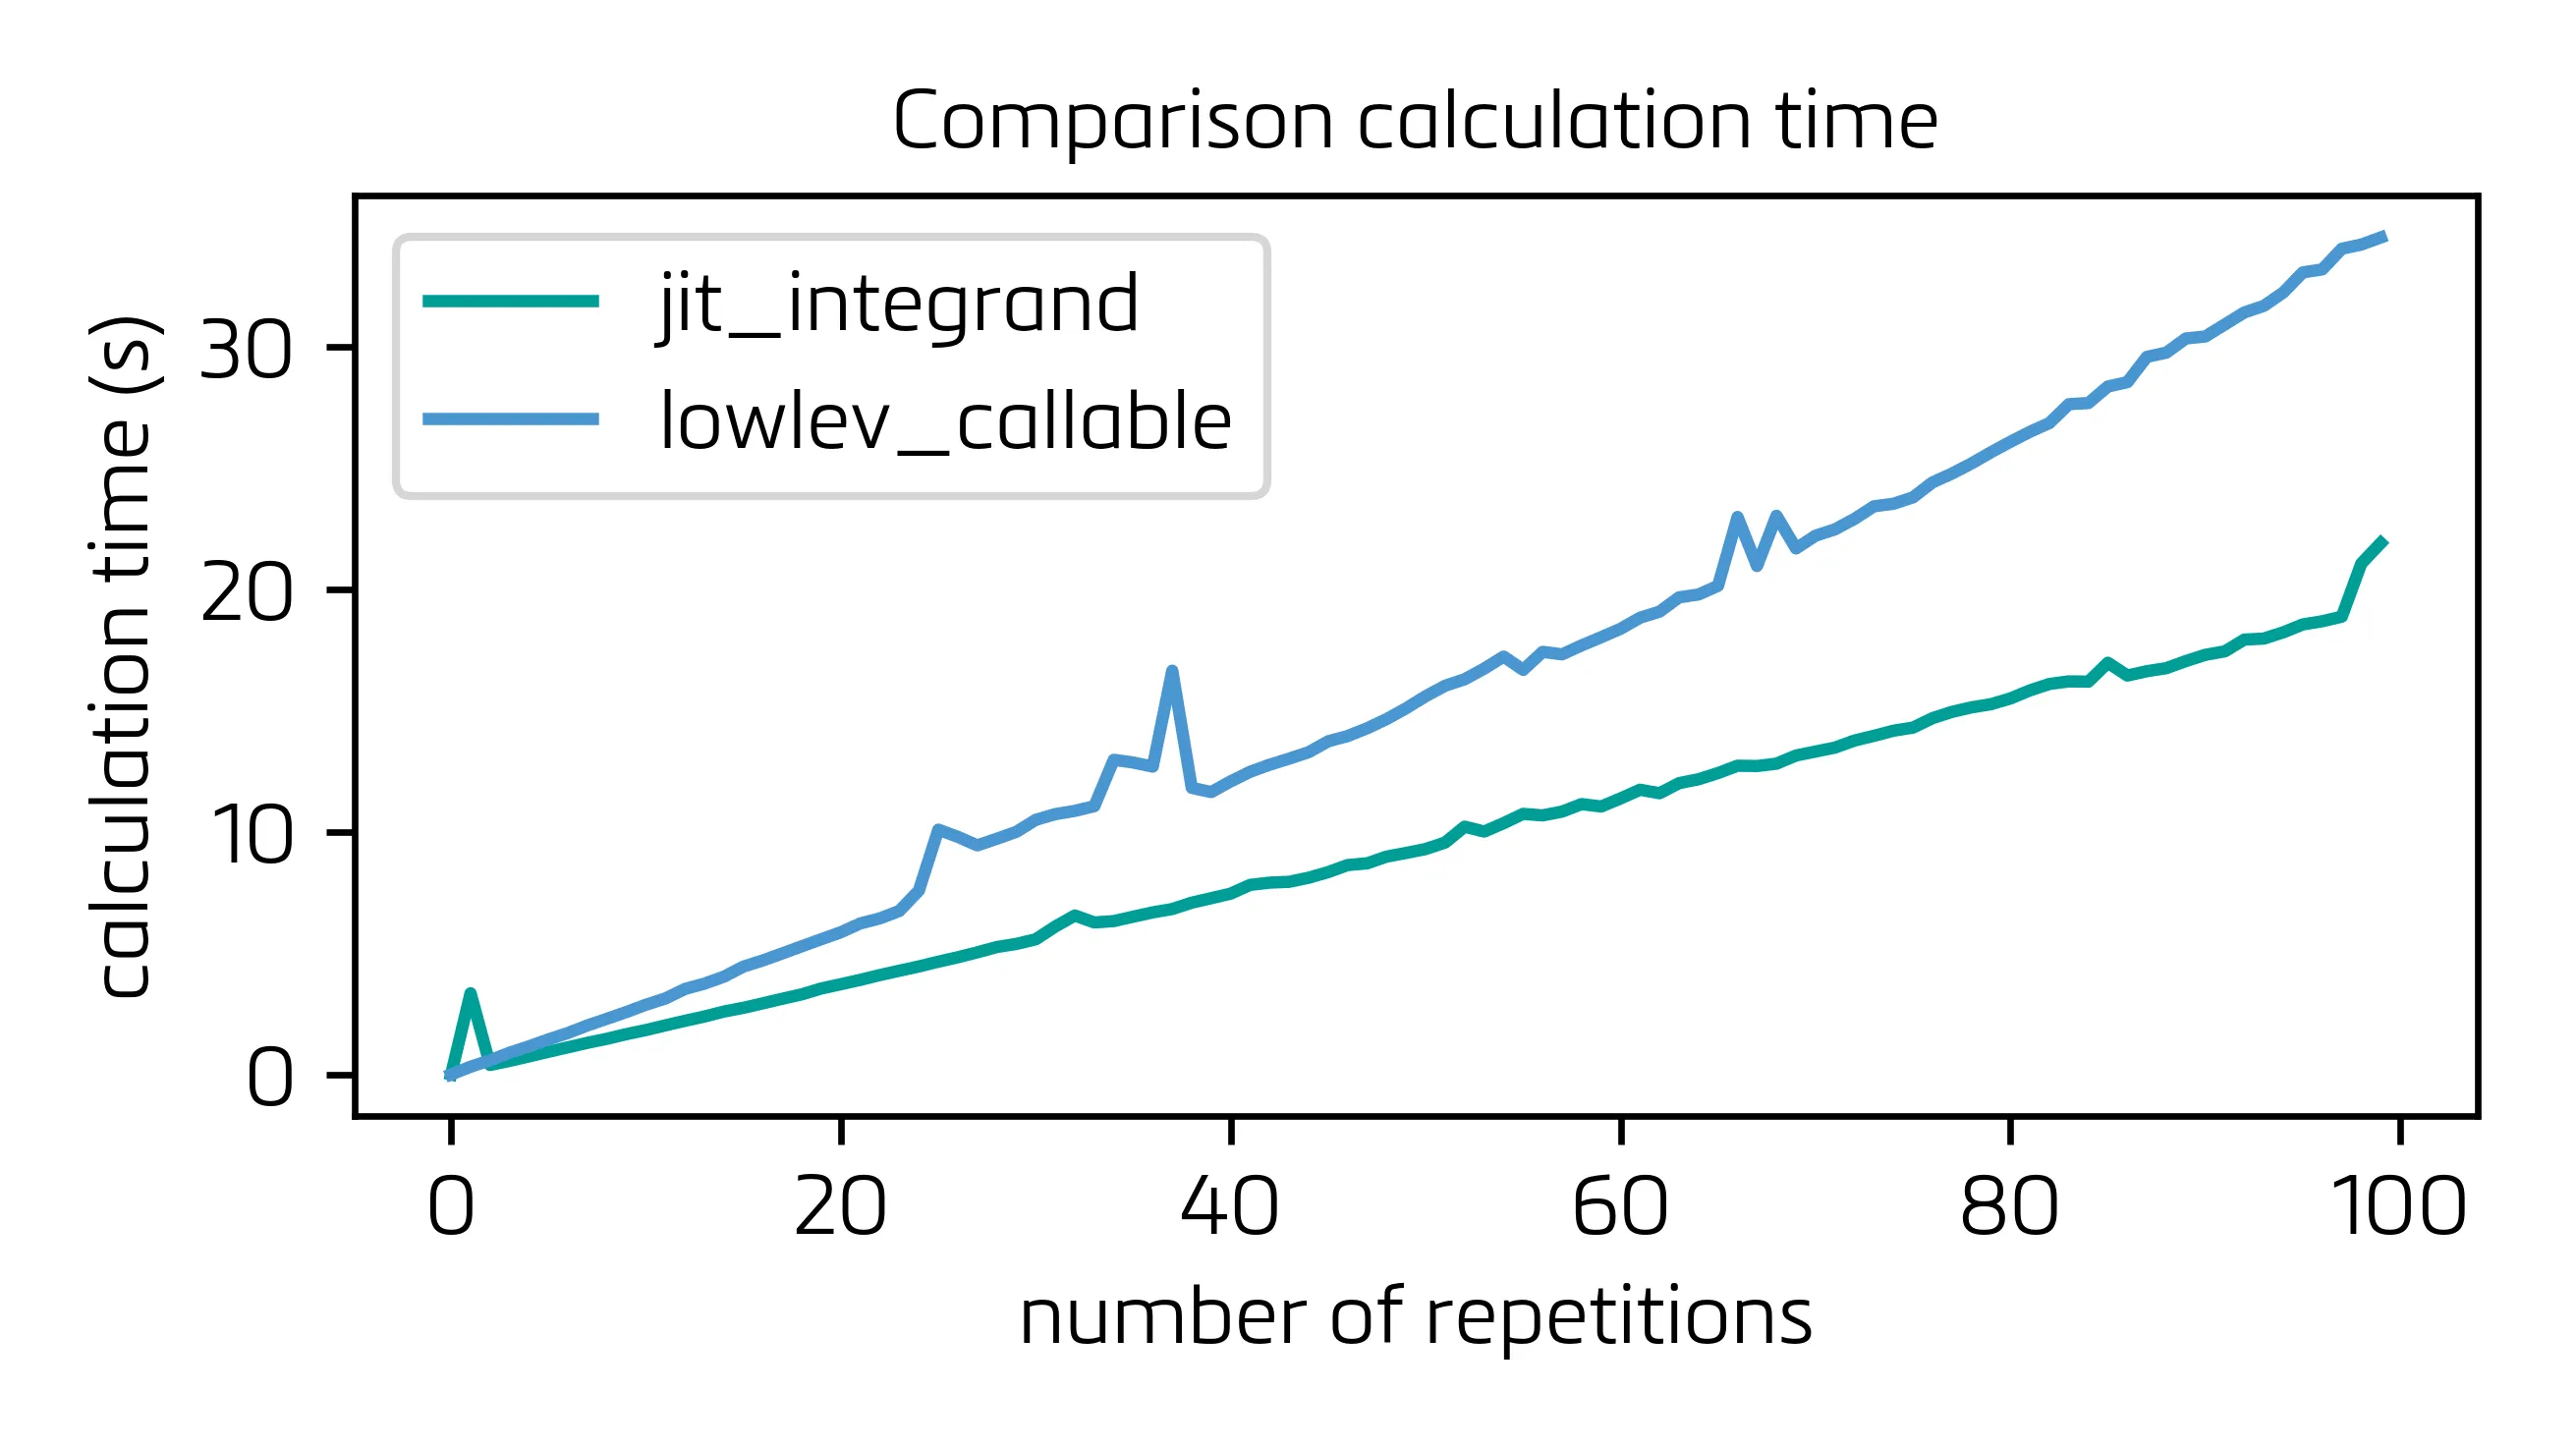 Calculation time ellapsed for only jitting the integrand vs building a LowLevelCallable